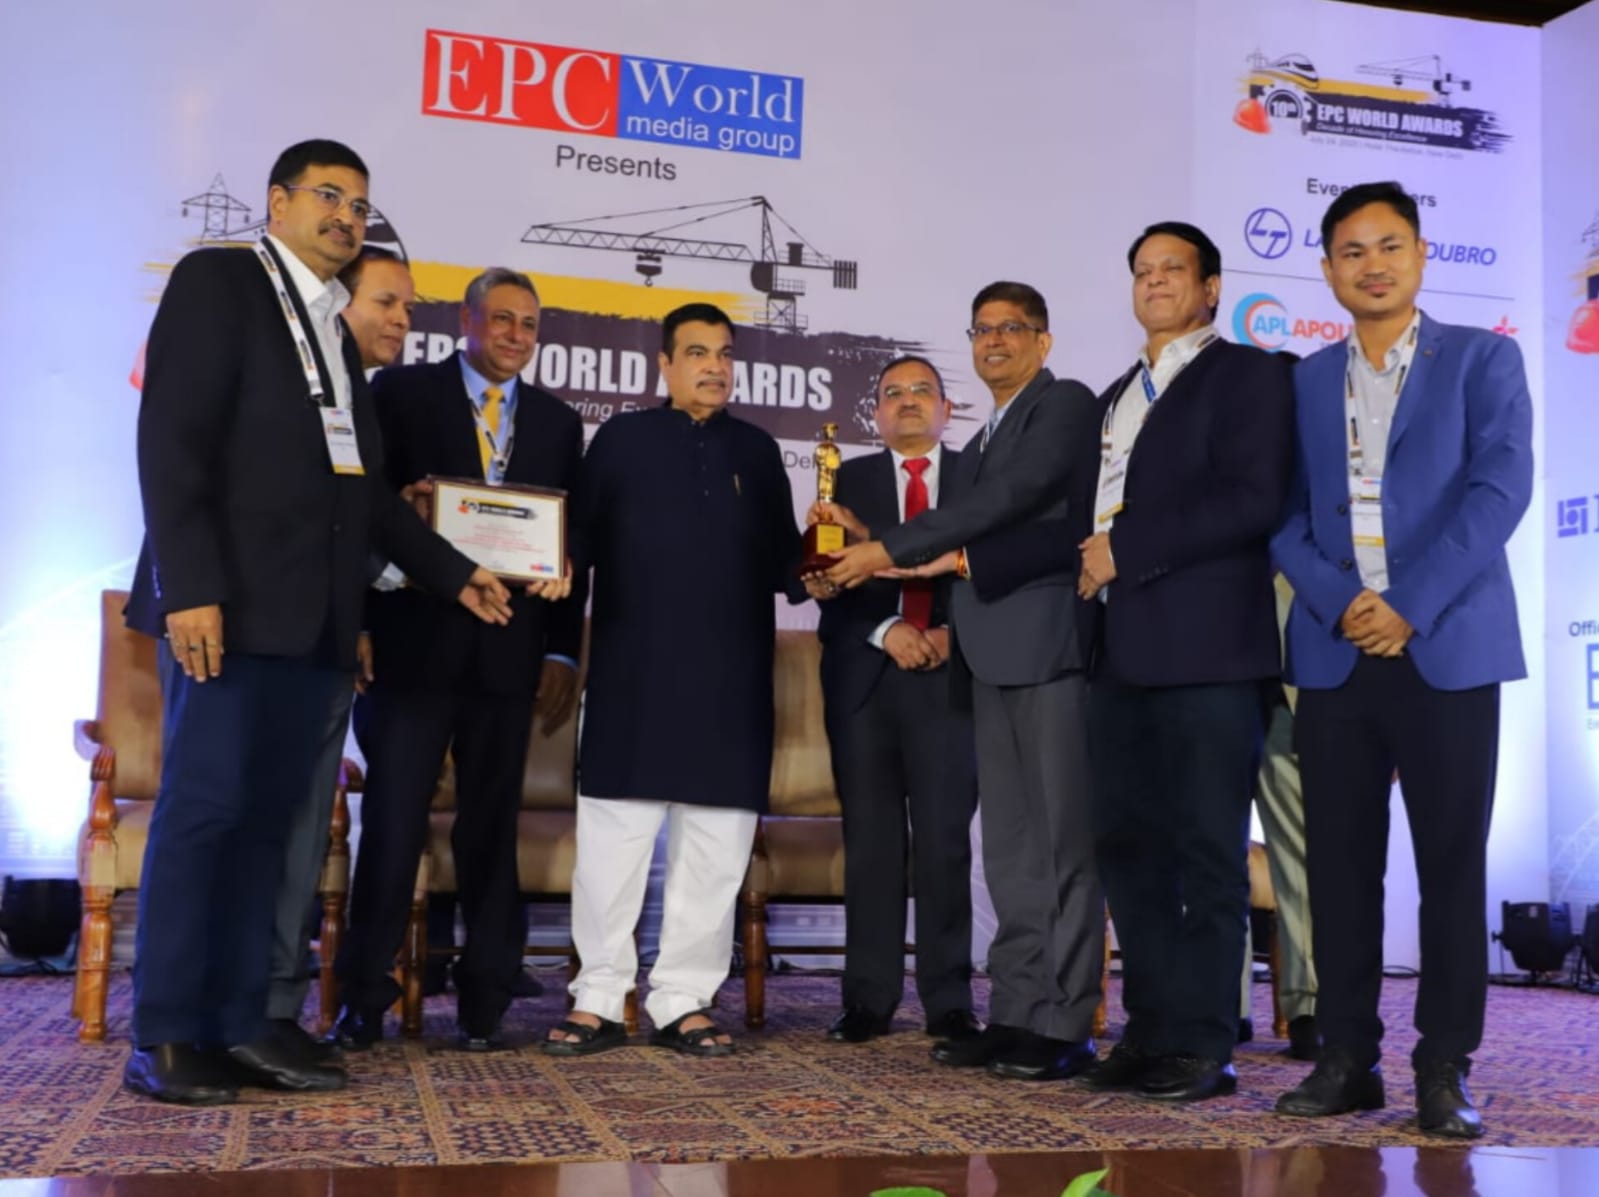 EPC World Award under the "Oil and Gas category